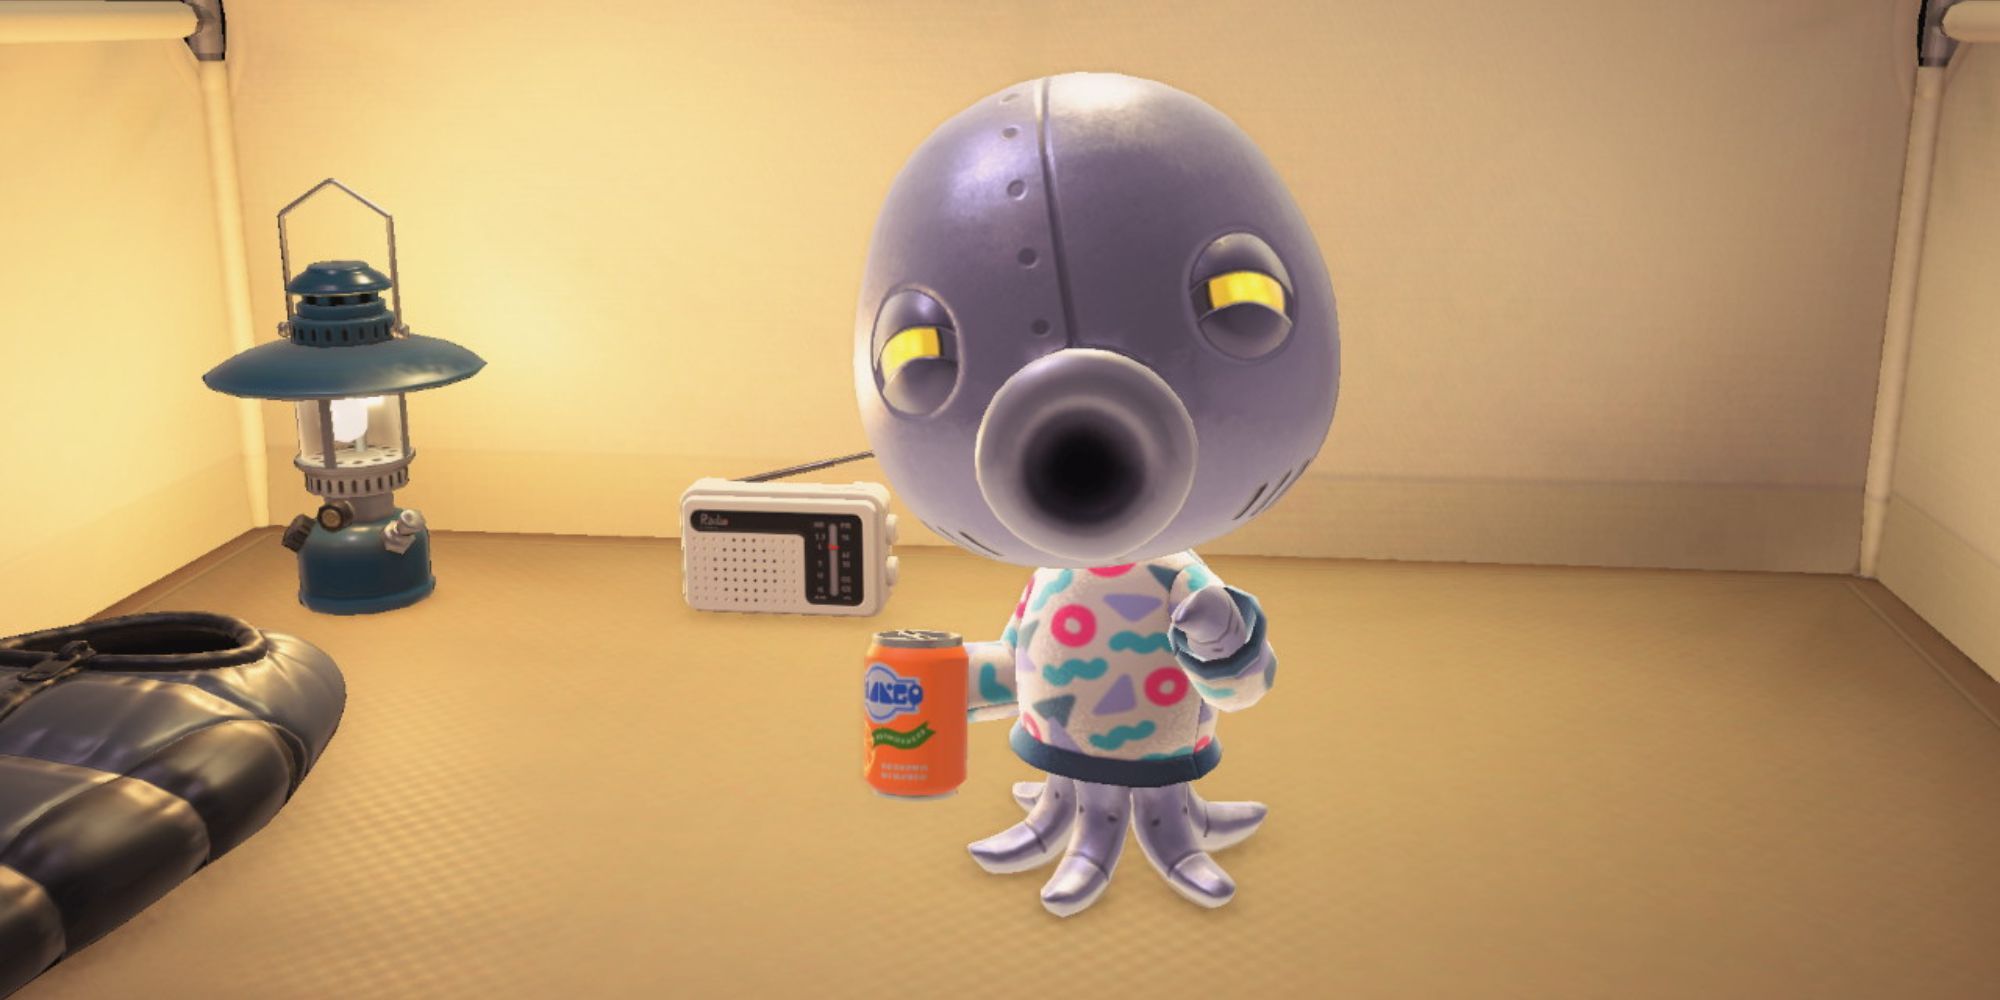 Cephalobot holds a soda can while standing in a tent